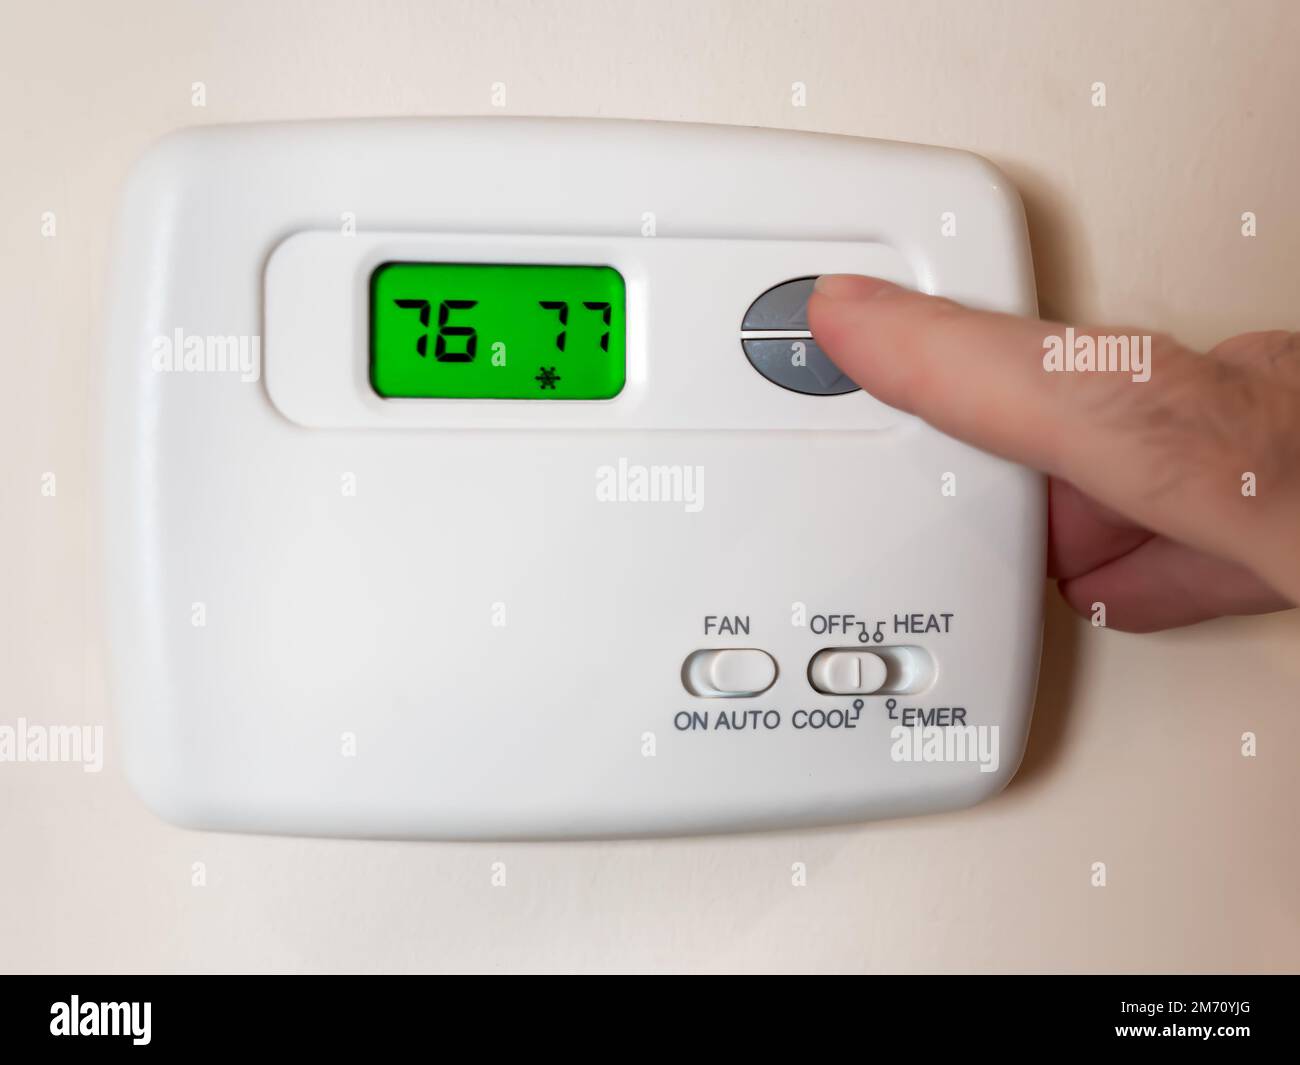 https://c8.alamy.com/comp/2M70YJG/closeup-of-a-mans-hand-setting-the-room-temperature-on-a-programmable-home-thermostat-2M70YJG.jpg